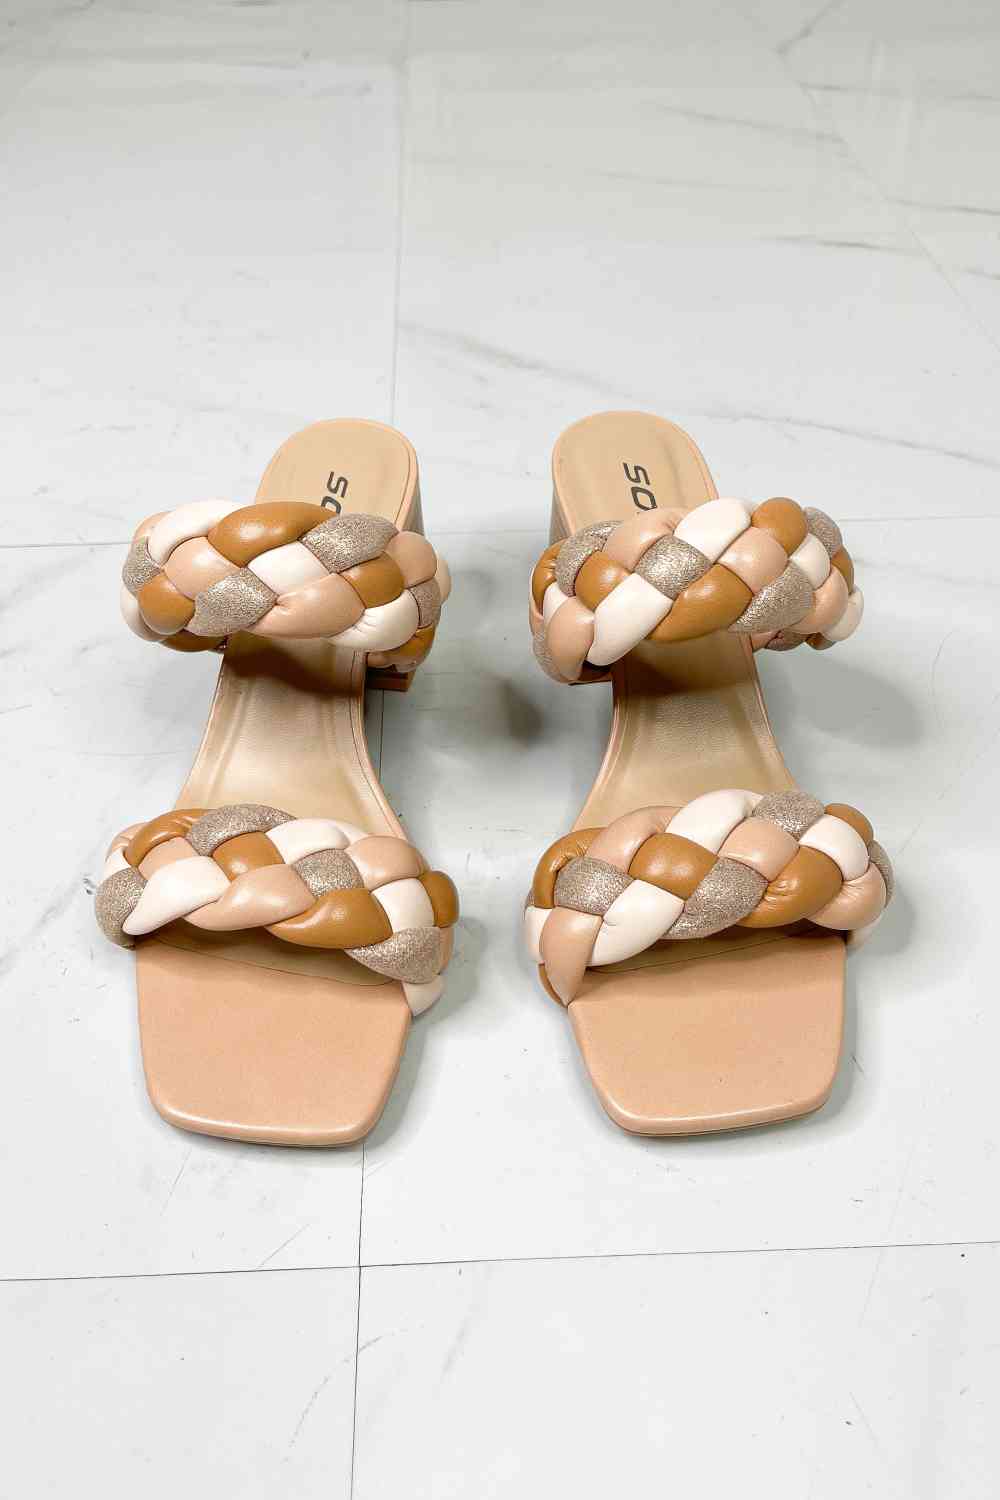 SODA Interwoven Ideas Braided Strap Block Heel Slide Sandal in Nude - Kawaii Stop - Black Friday, Block Heel Sandals, Chic Footwear, Comfortable, Fashionable, FORTUNE DYNAMIC, Imported Design, Mid Heels, Mules, Must-Have, Open Toe, Pedicure-Ready, Ship from USA, Slide Sandals, Stylish, Trendy, Versatile, Vibrant Pattern, Women's Shoes, Workwear